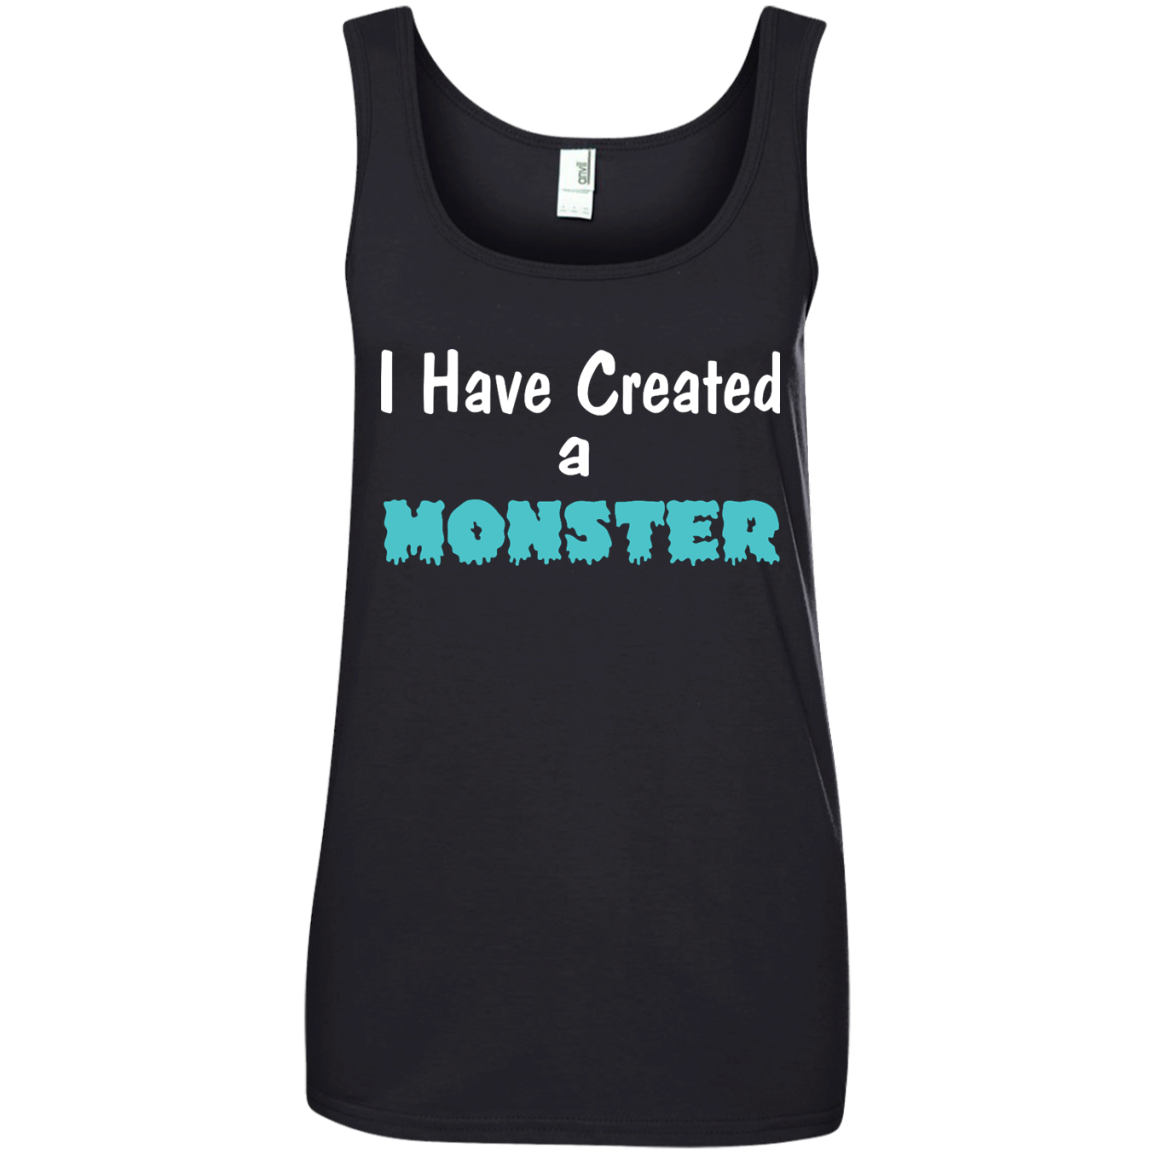 I Have Created a Monster shirt, tank, recerback